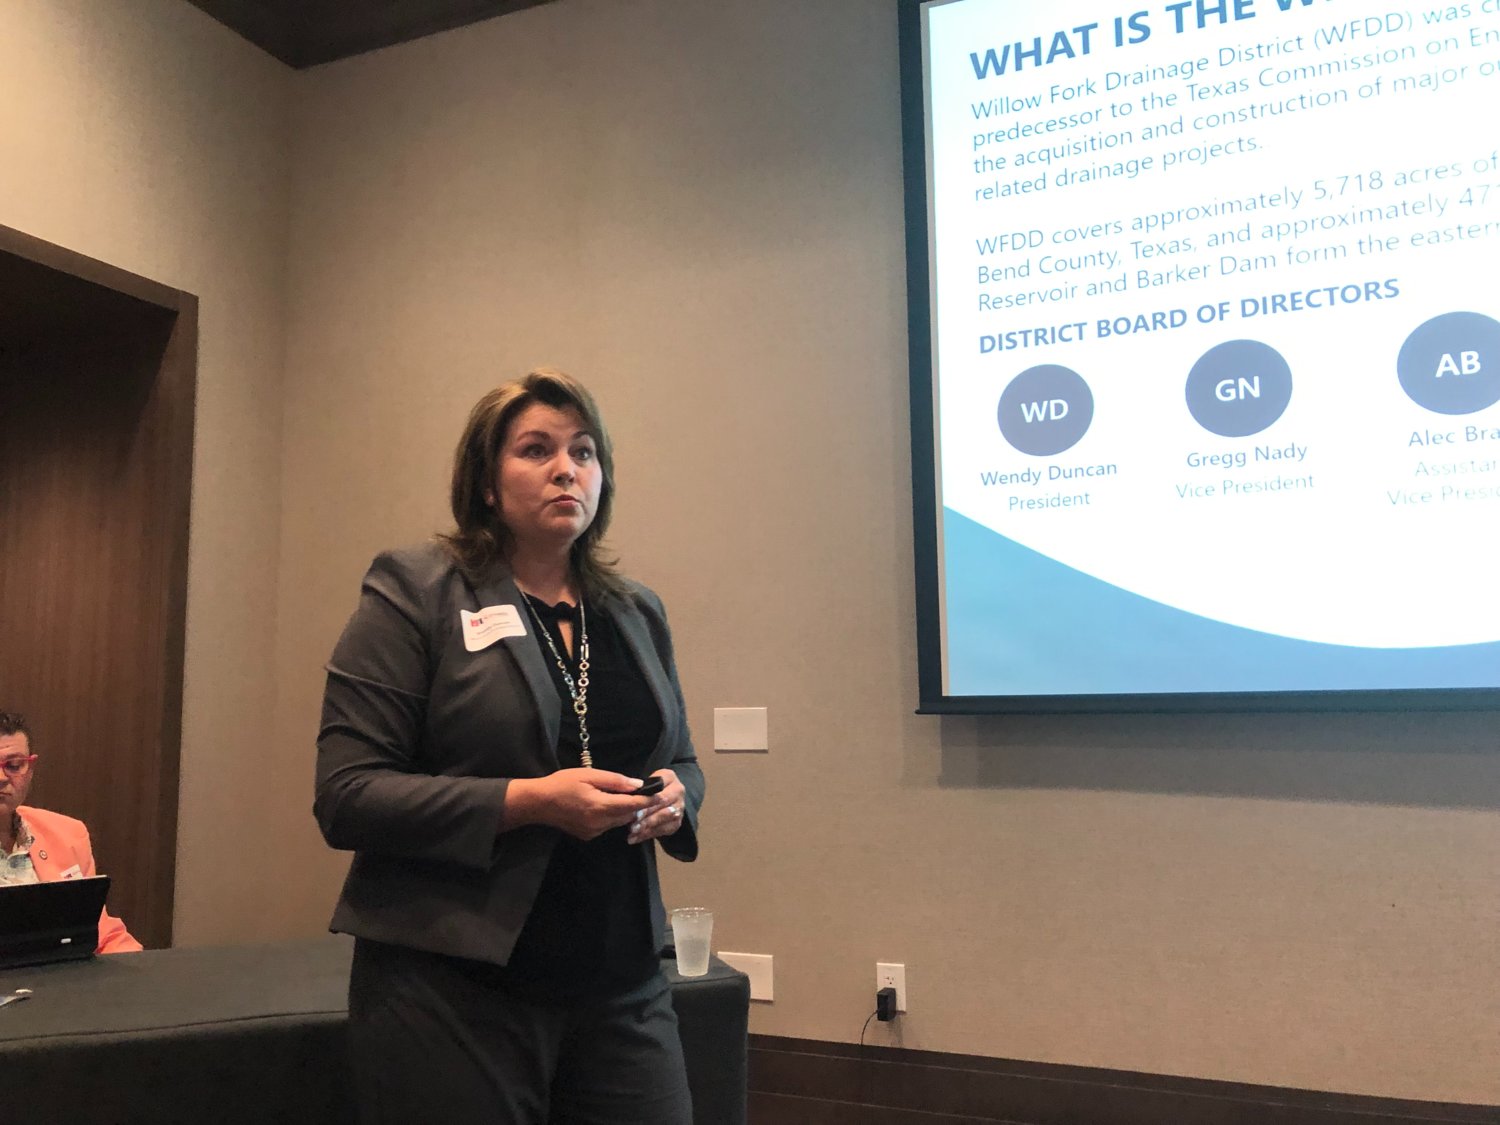 Wendy Duncan, Willow Fork drainage District Pres., speaks at an infrastructure summit hosted by the Katy Area Chamber of Commerce.